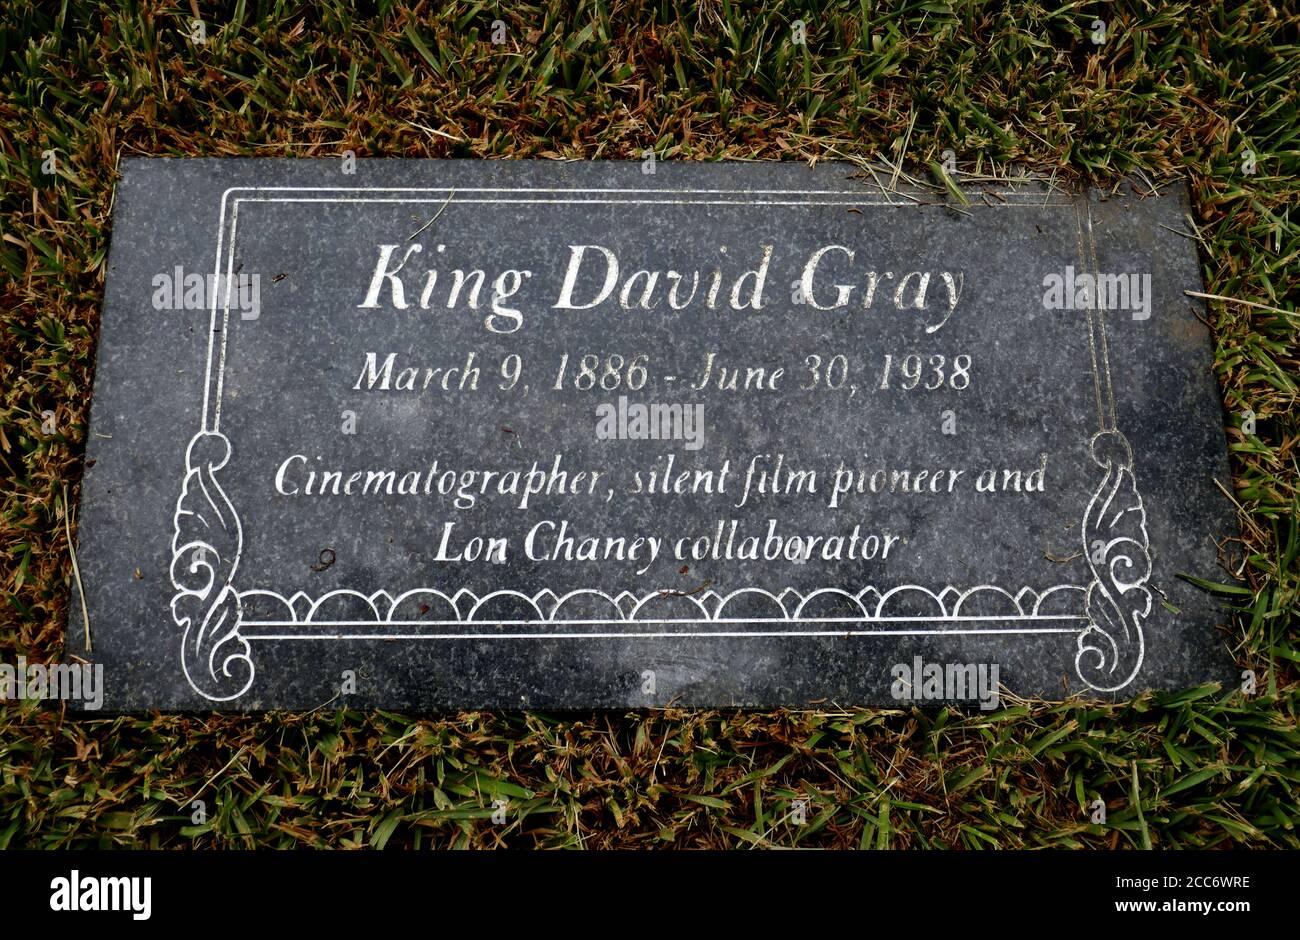 Hollywood, California, USA 17th August 2020 A general view of atmosphere of King David Gray's Grave at Hollywood Forever Cemetery on August 17, 2020 in Hollywood, California, USA. Photo by Barry King/Alamy Stock Photo Stock Photo